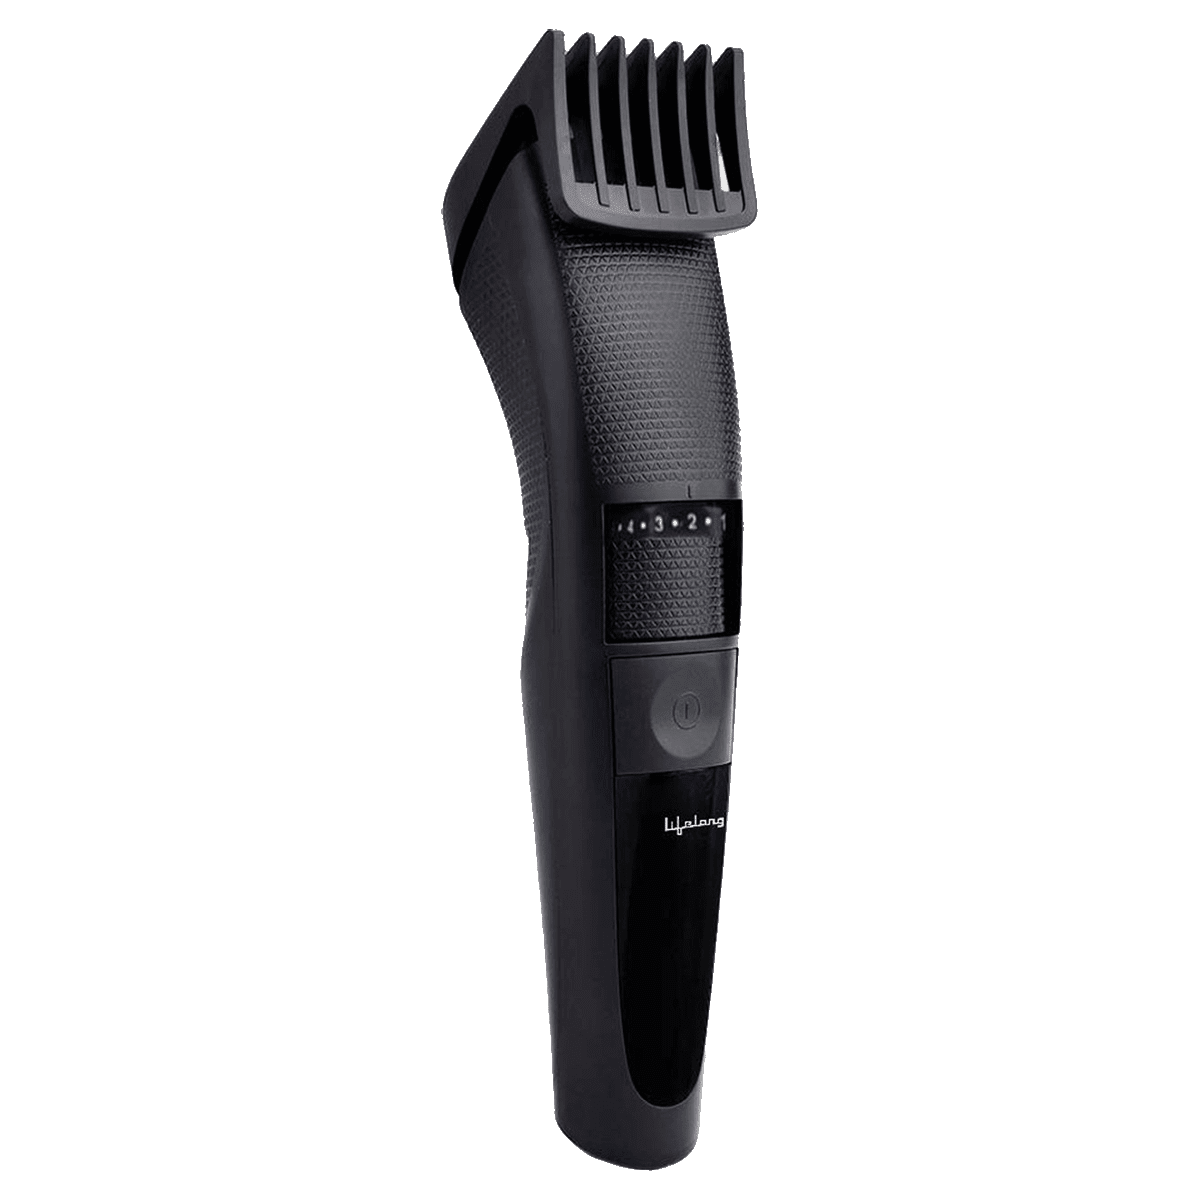 philips trimmer in croma